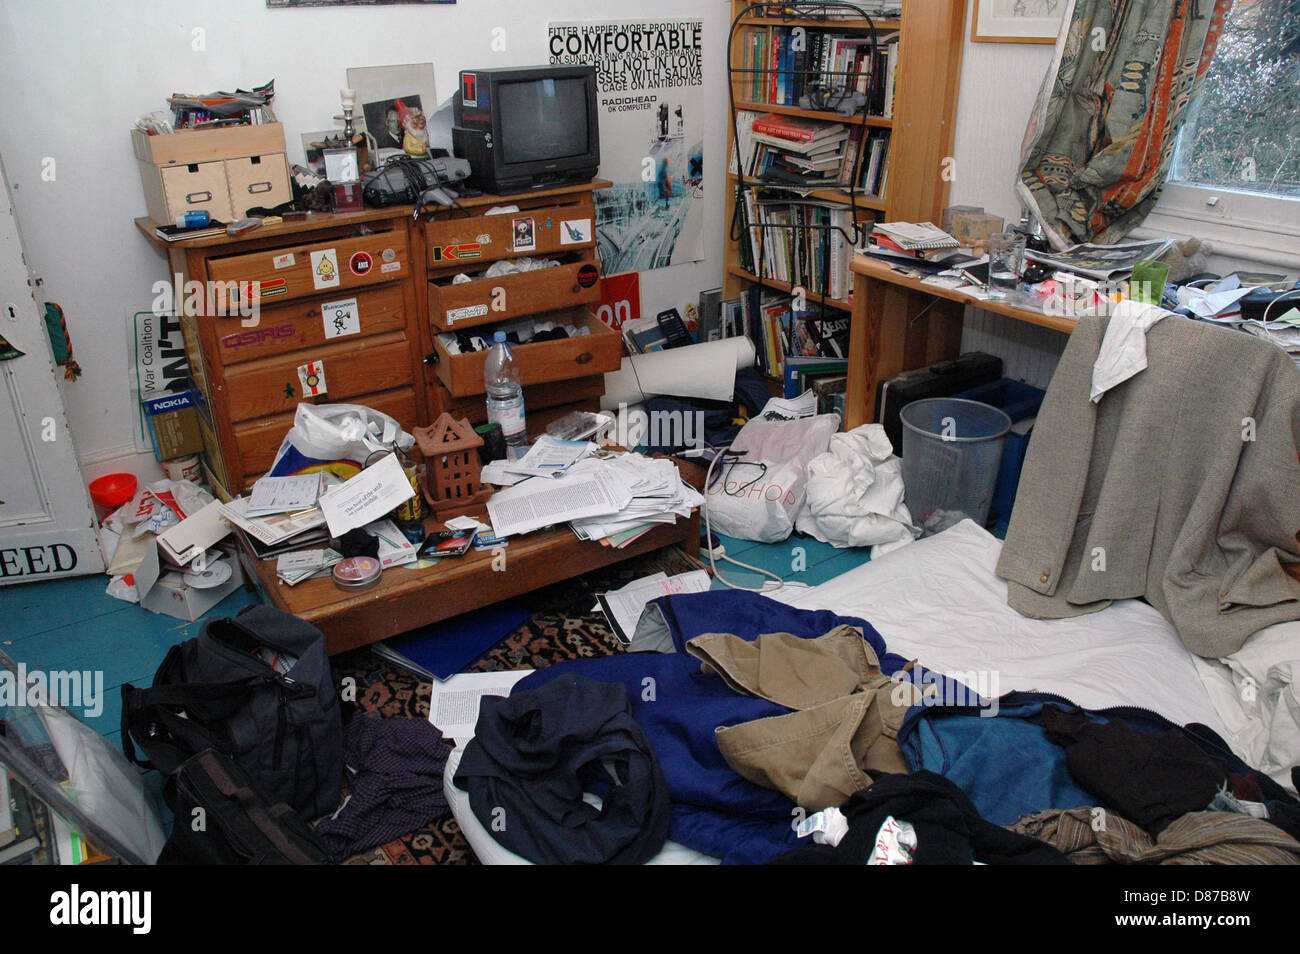 Messy Bedroom Teen Boy High Resolution Stock Photography And Images Alamy